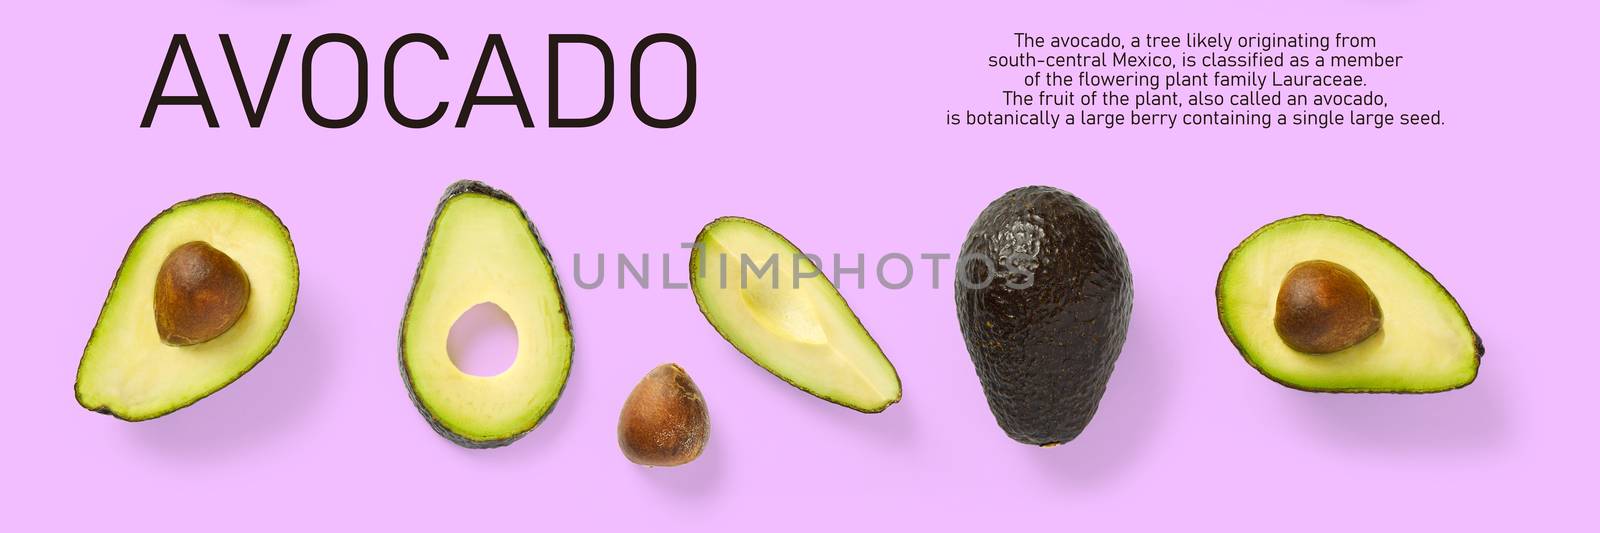 Modern creative avocado collage with simple text on solid color background. Avocado slices creative layout on pink background. Flat lay, Design elements, Food concept